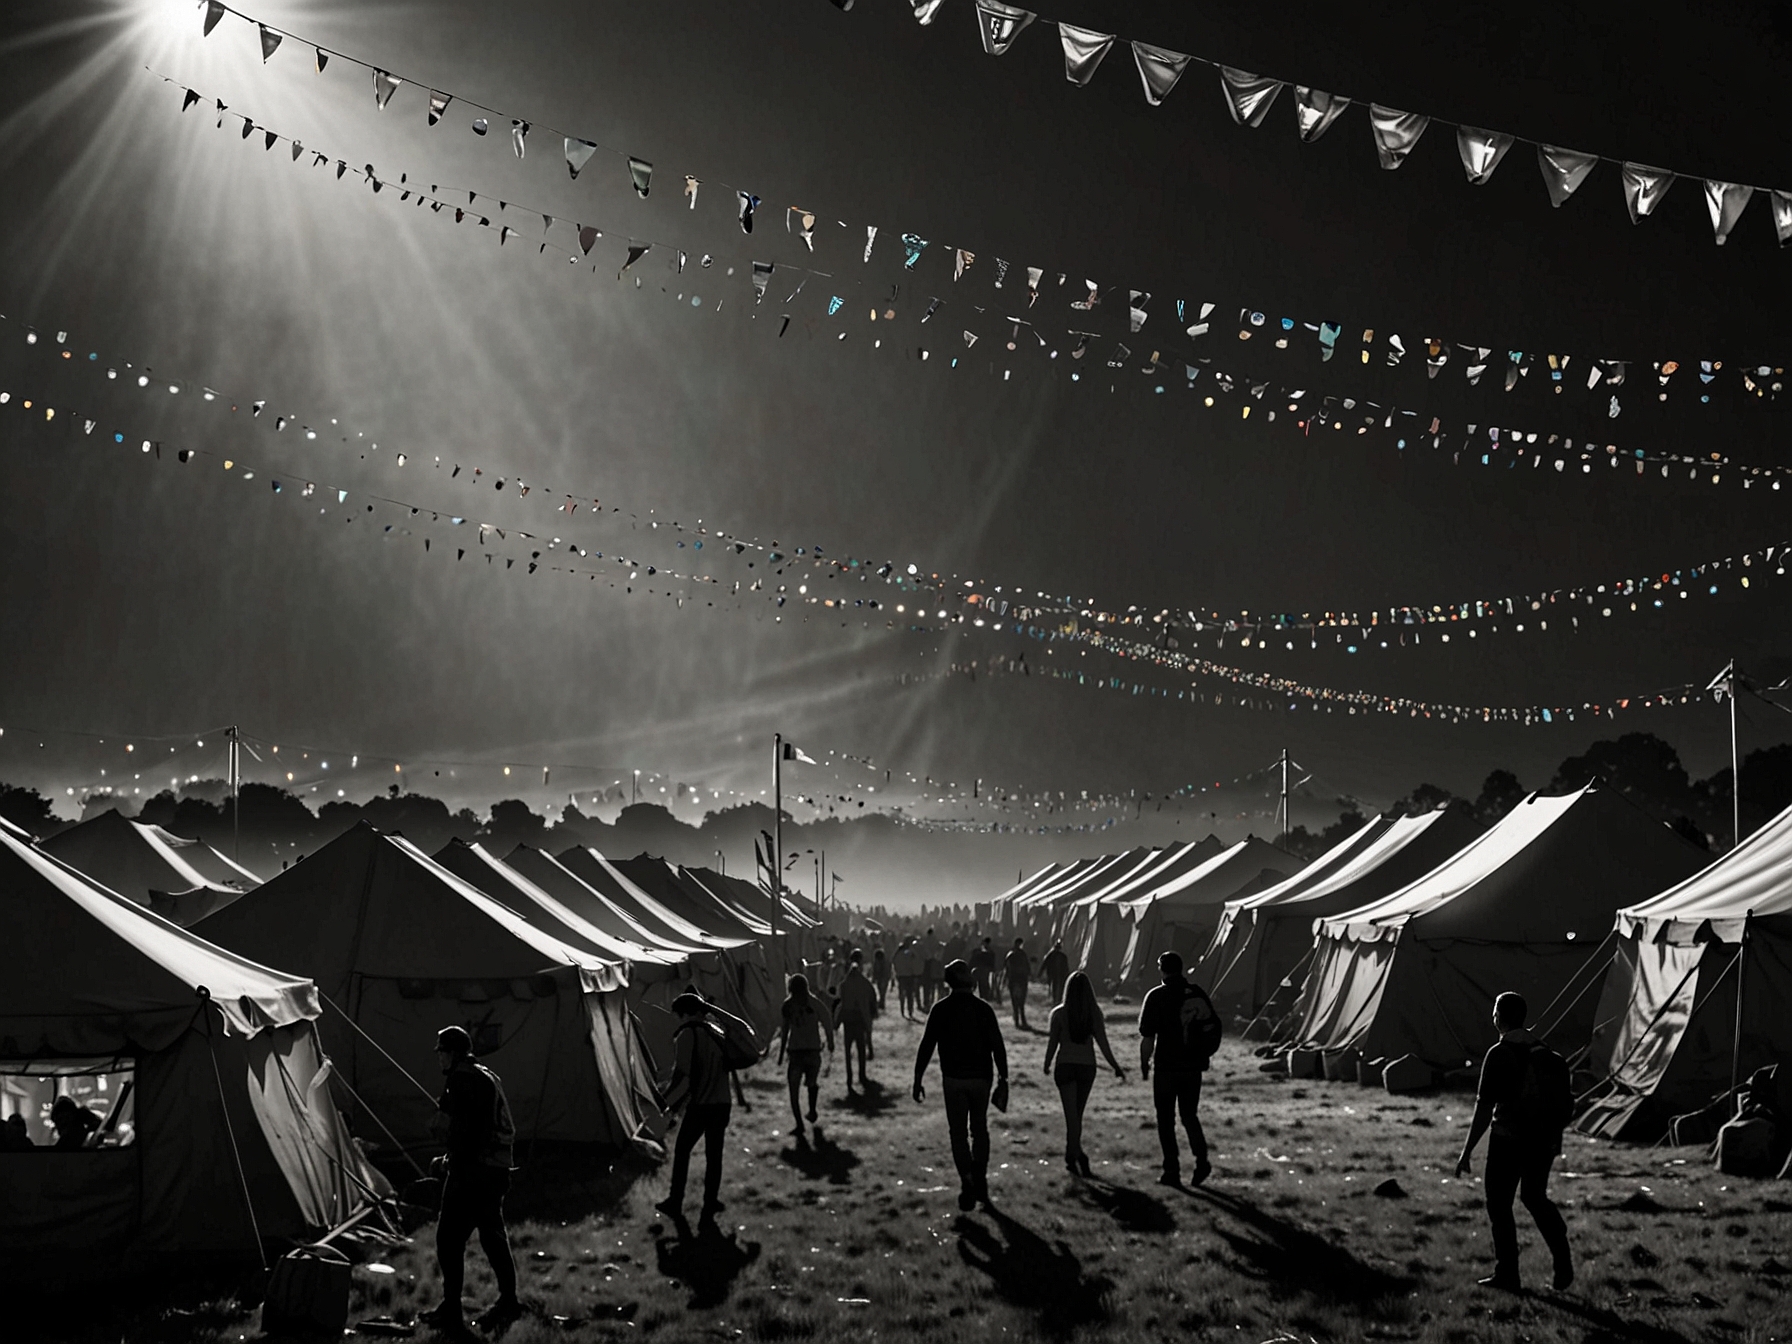 Festival-goers at Glastonbury navigate through a sea of tents, marked with unique flags and lights, exemplifying the importance of preparation and organization amidst the vast gathering.